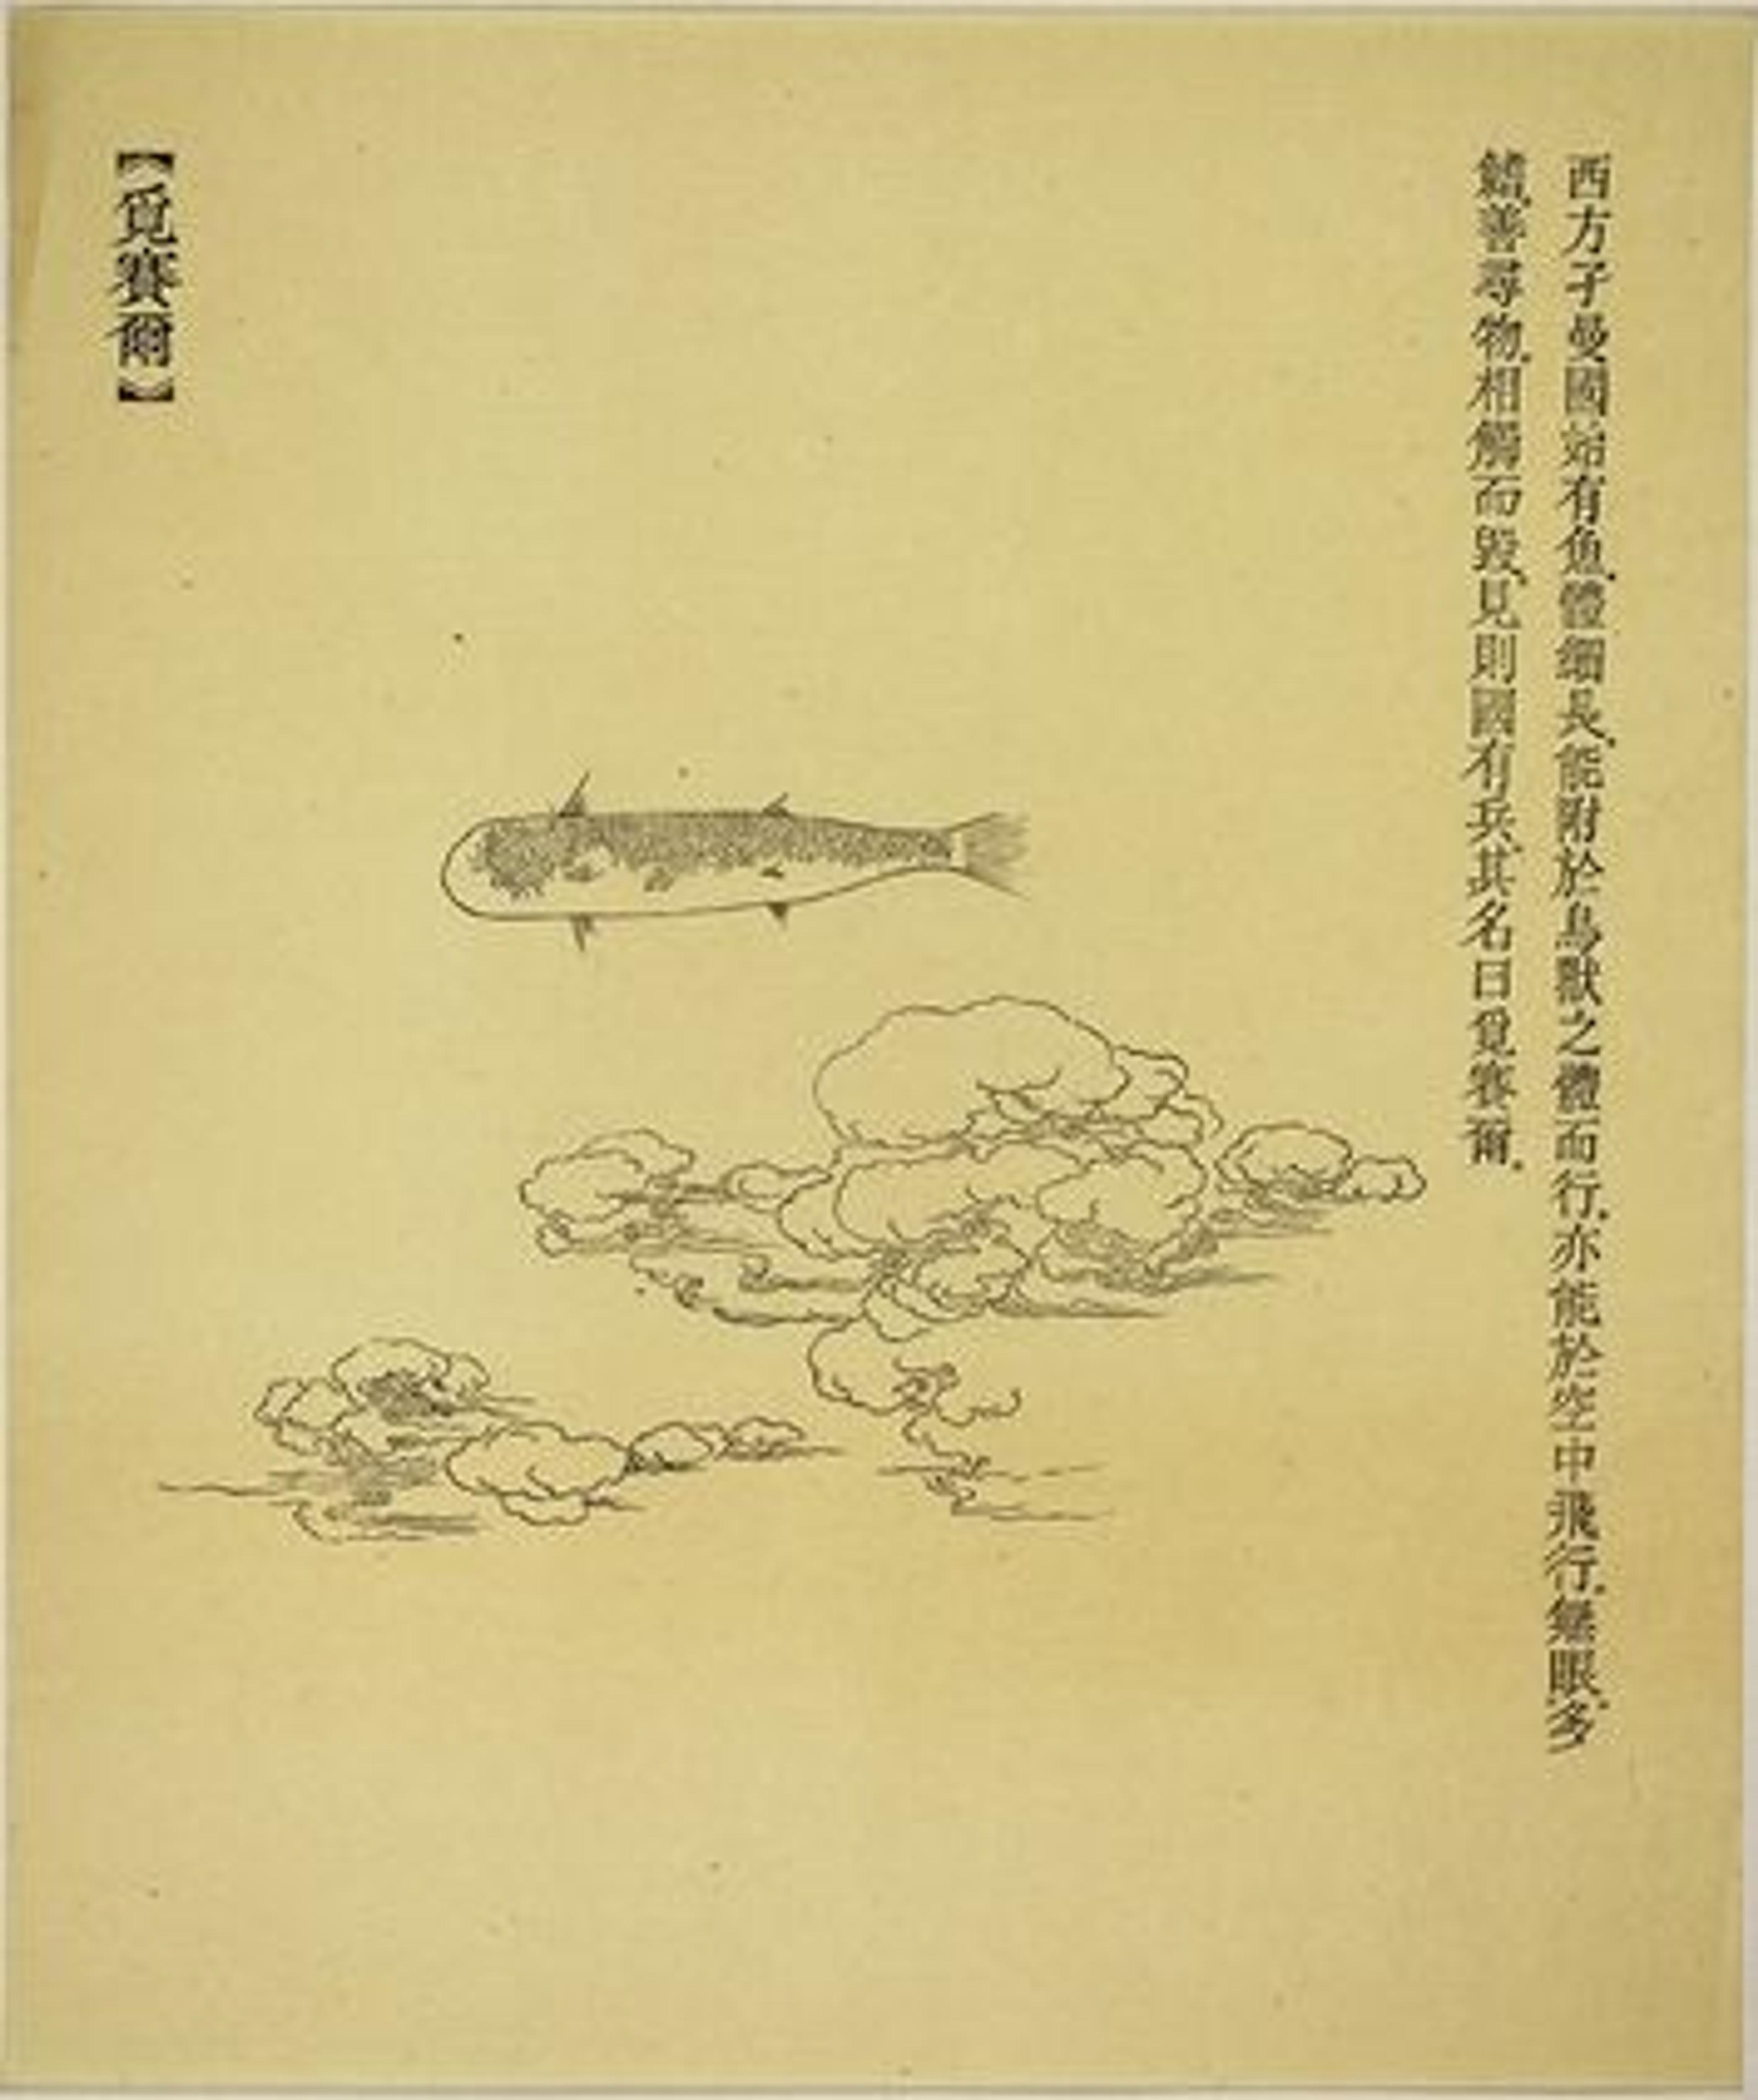 Leaf from album showing fishlike creature flying above the clouds